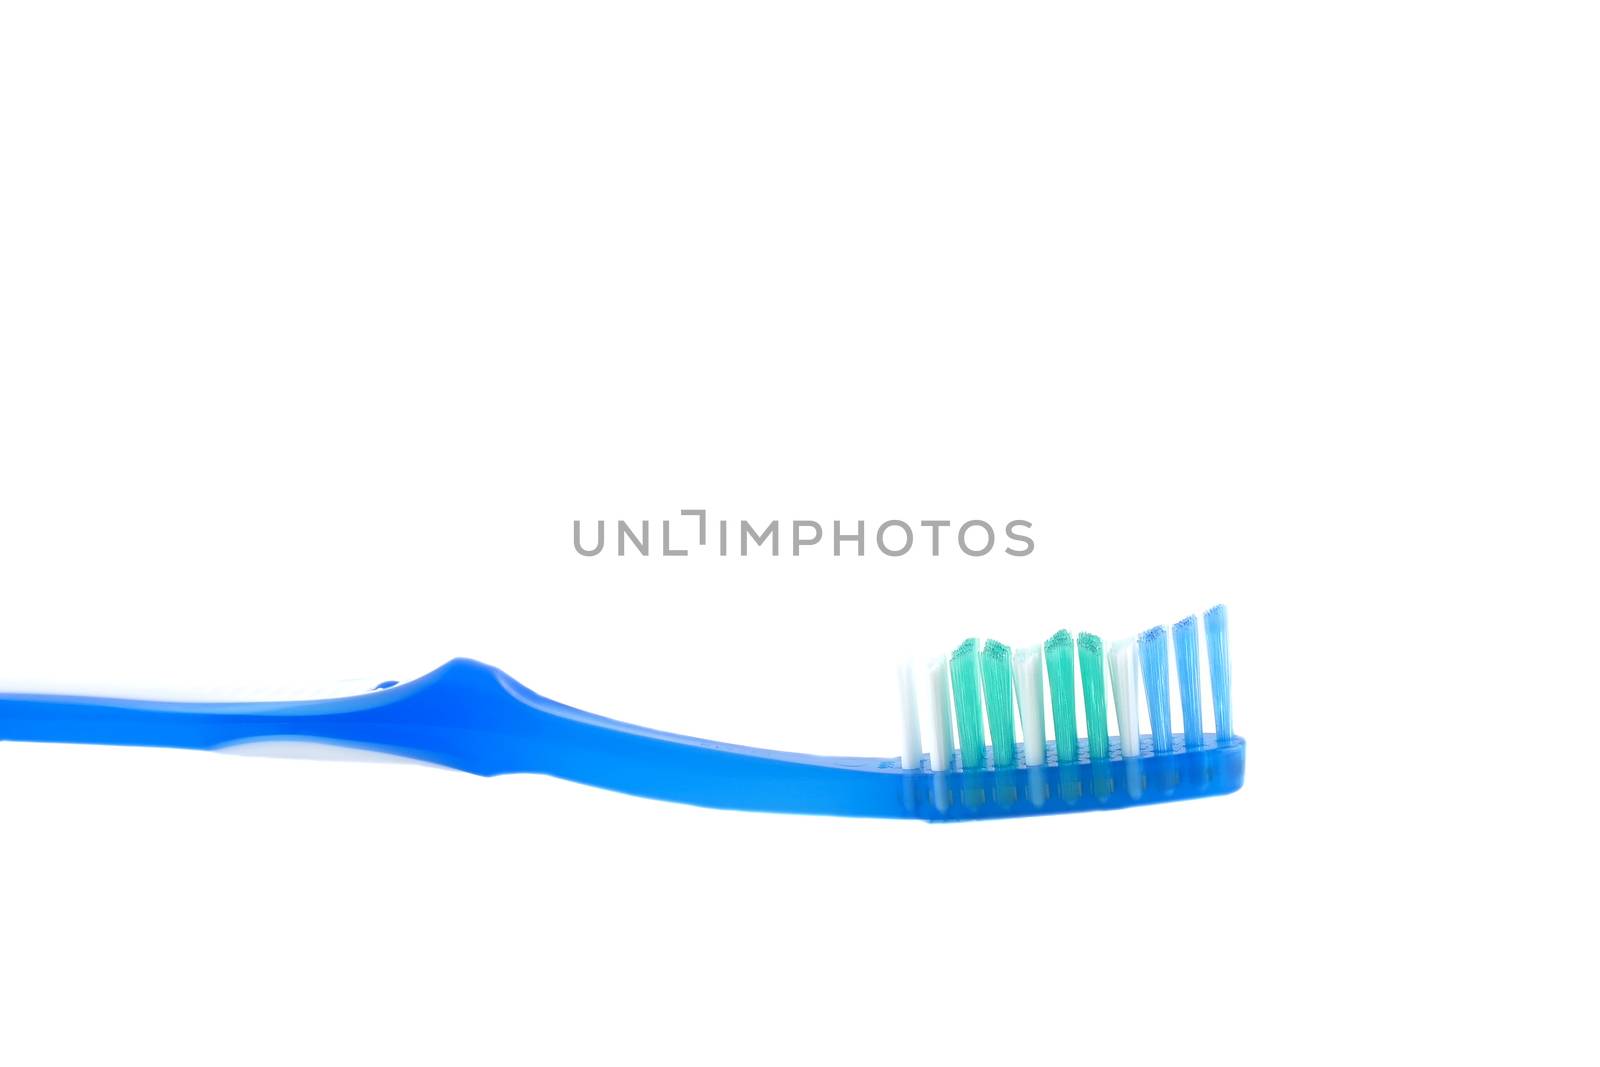 Tooth-brush by sergpet